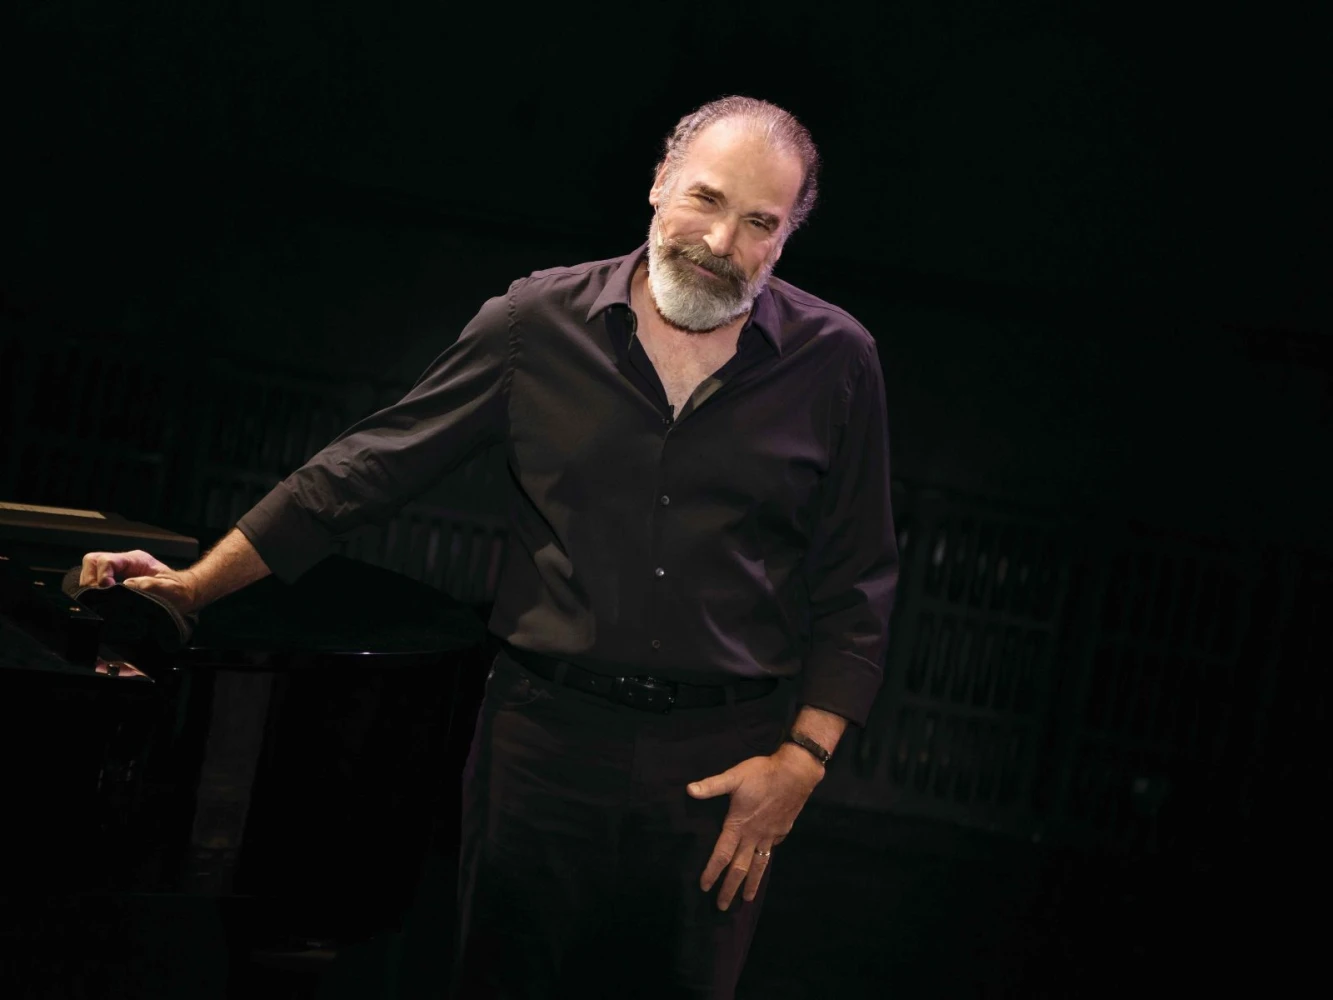 Mandy Patinkin in Concert: Being Alive with Adam Ben-David on Piano: What to expect - 2